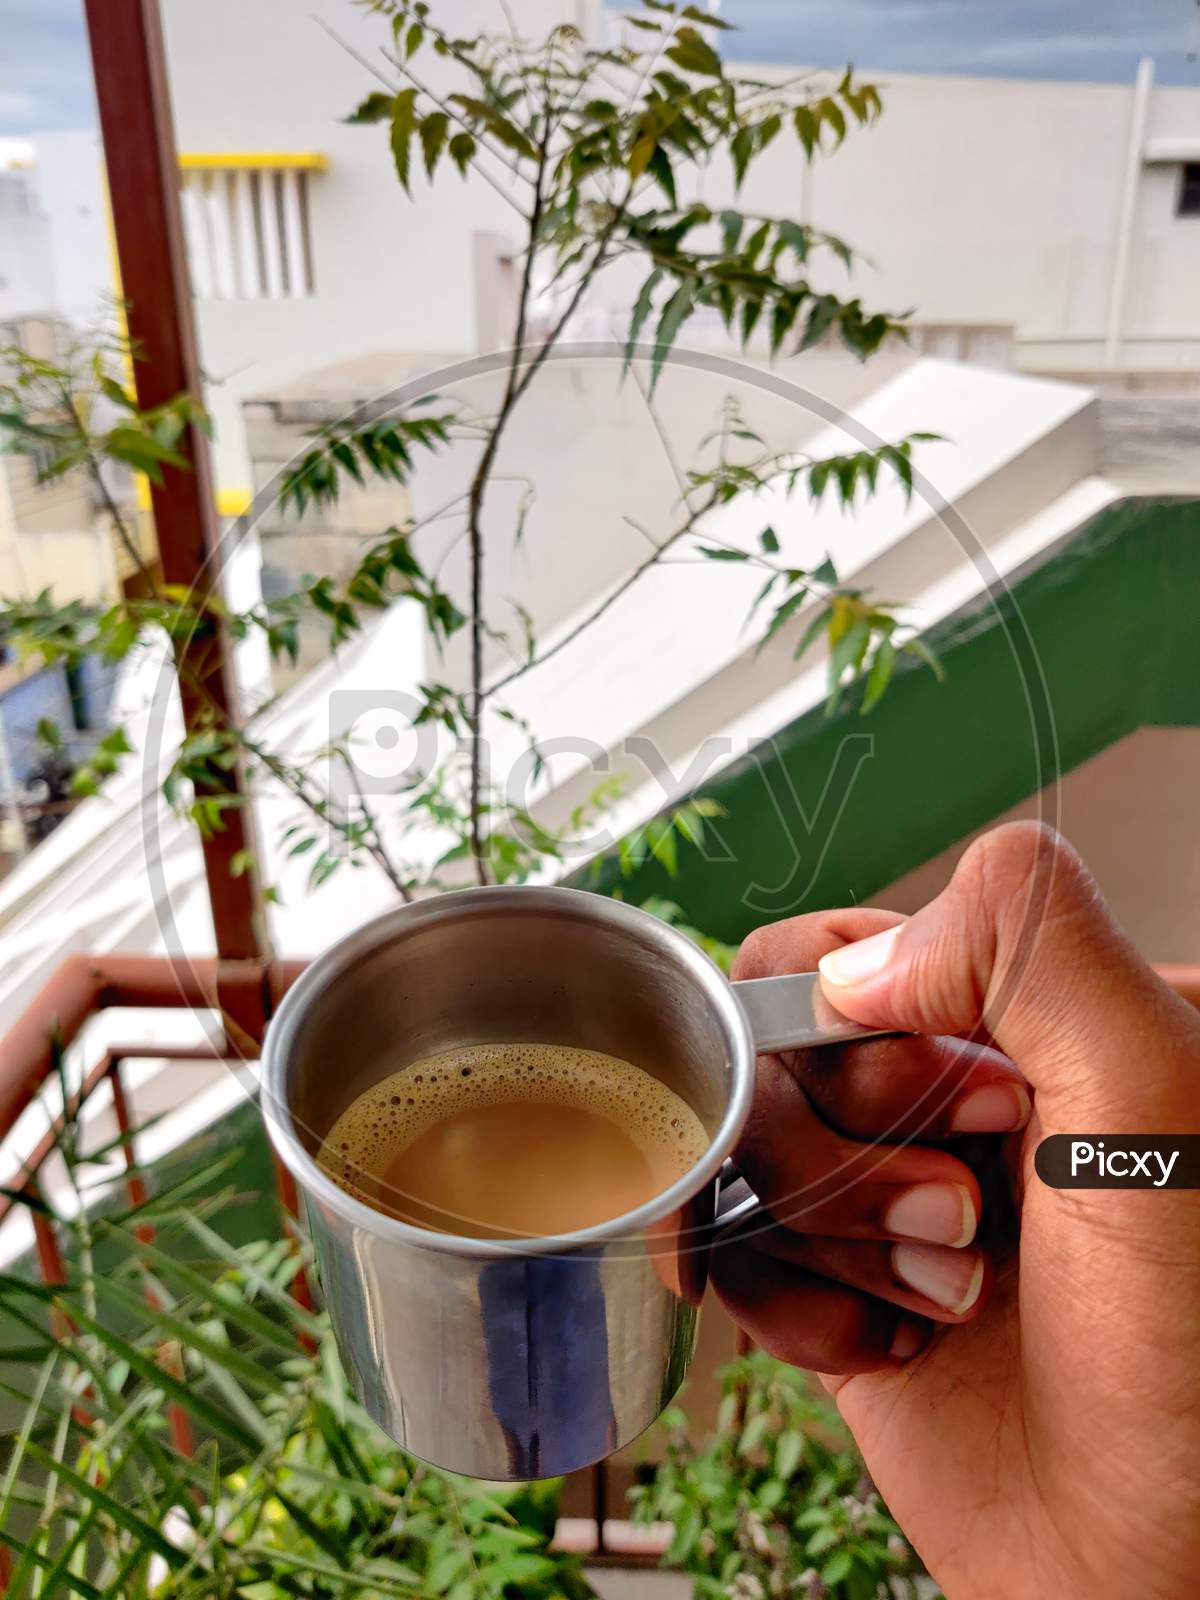 Hand Of Young Boy Holding A Silver Cup Filled With Coffee On Neem Trees Background. Evening Vibes